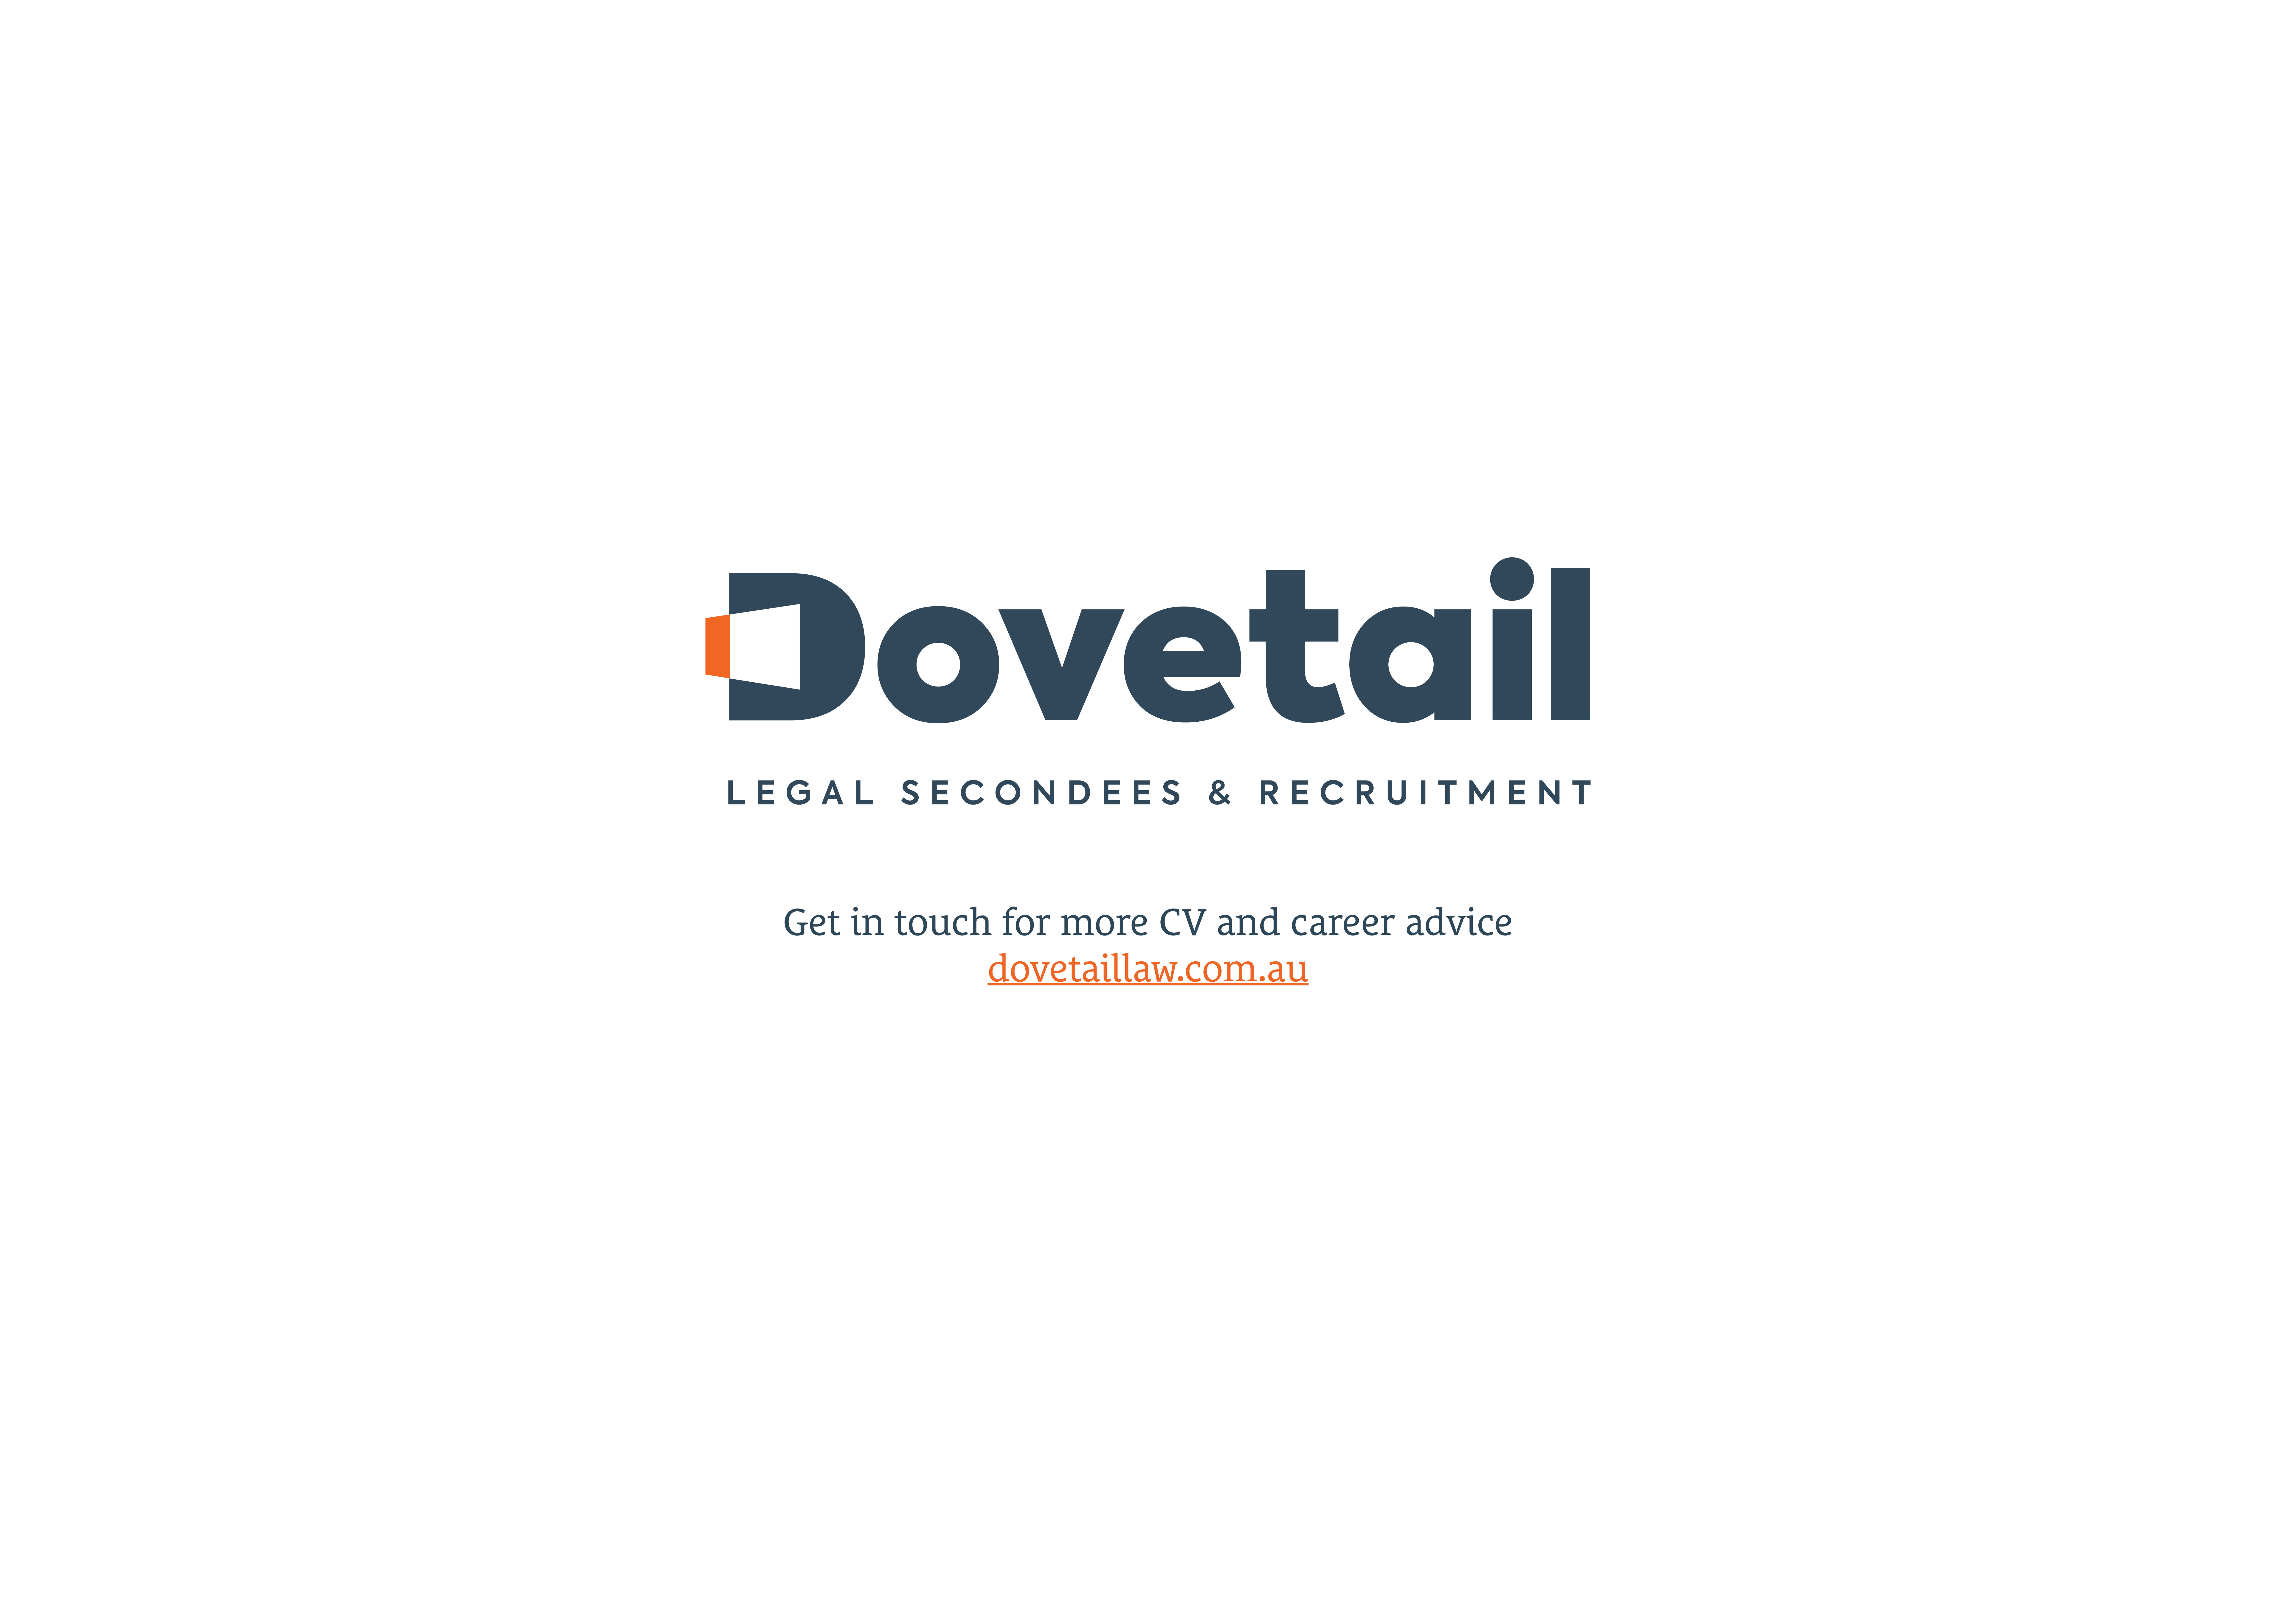 Dovetail Legal Secondees and Recruitment logo